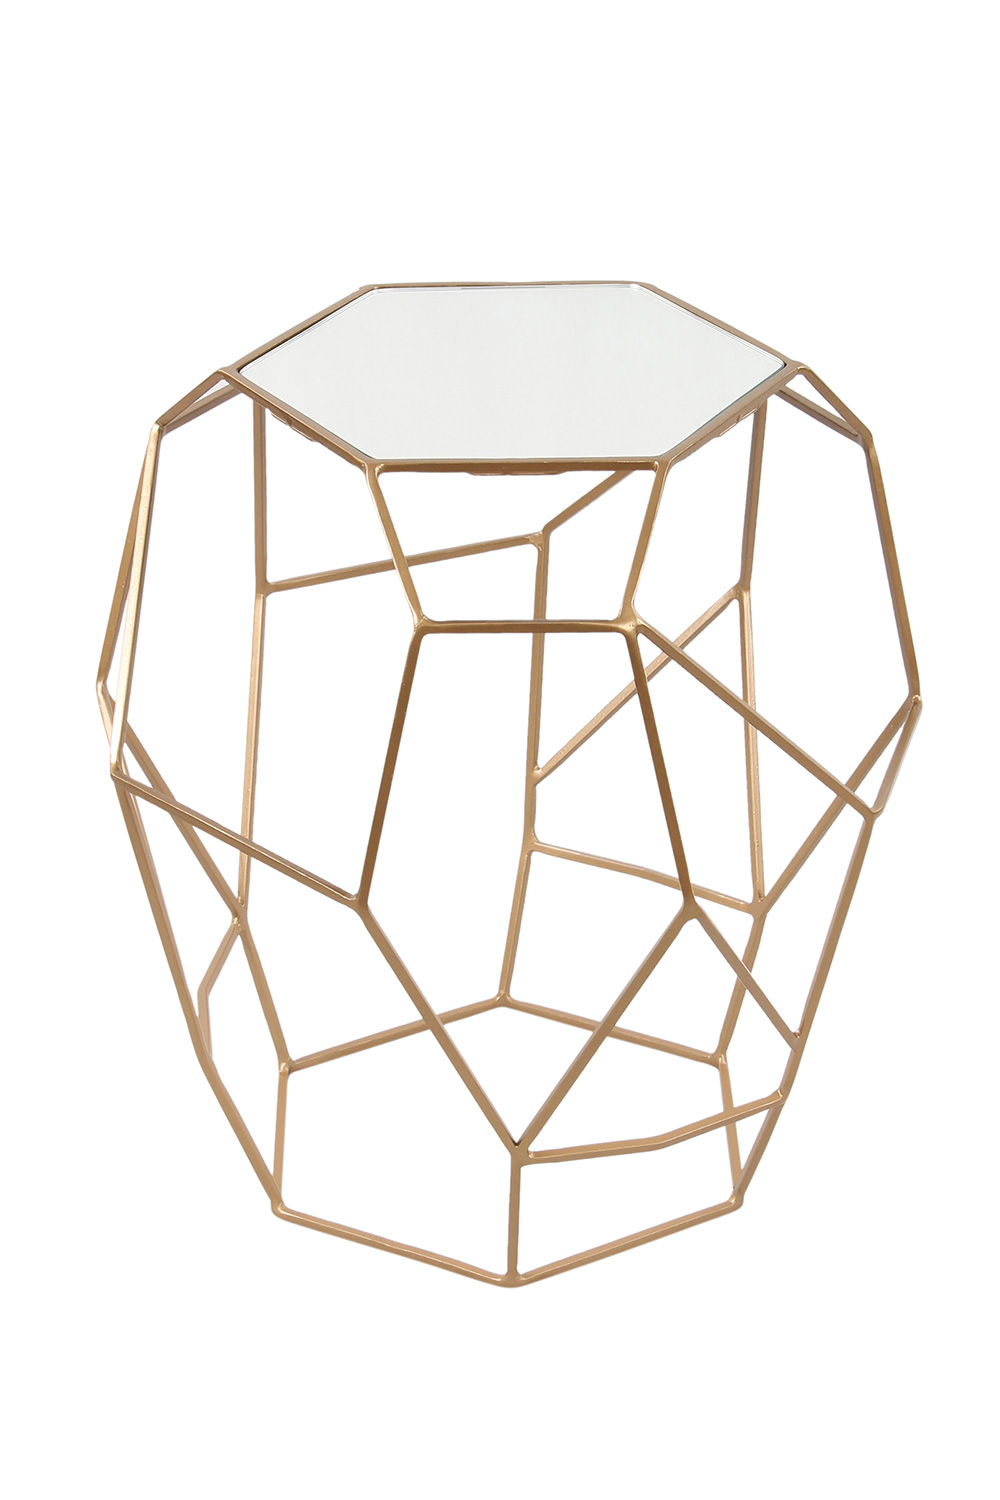 Ren-Wil Veil Accent Table - Gold